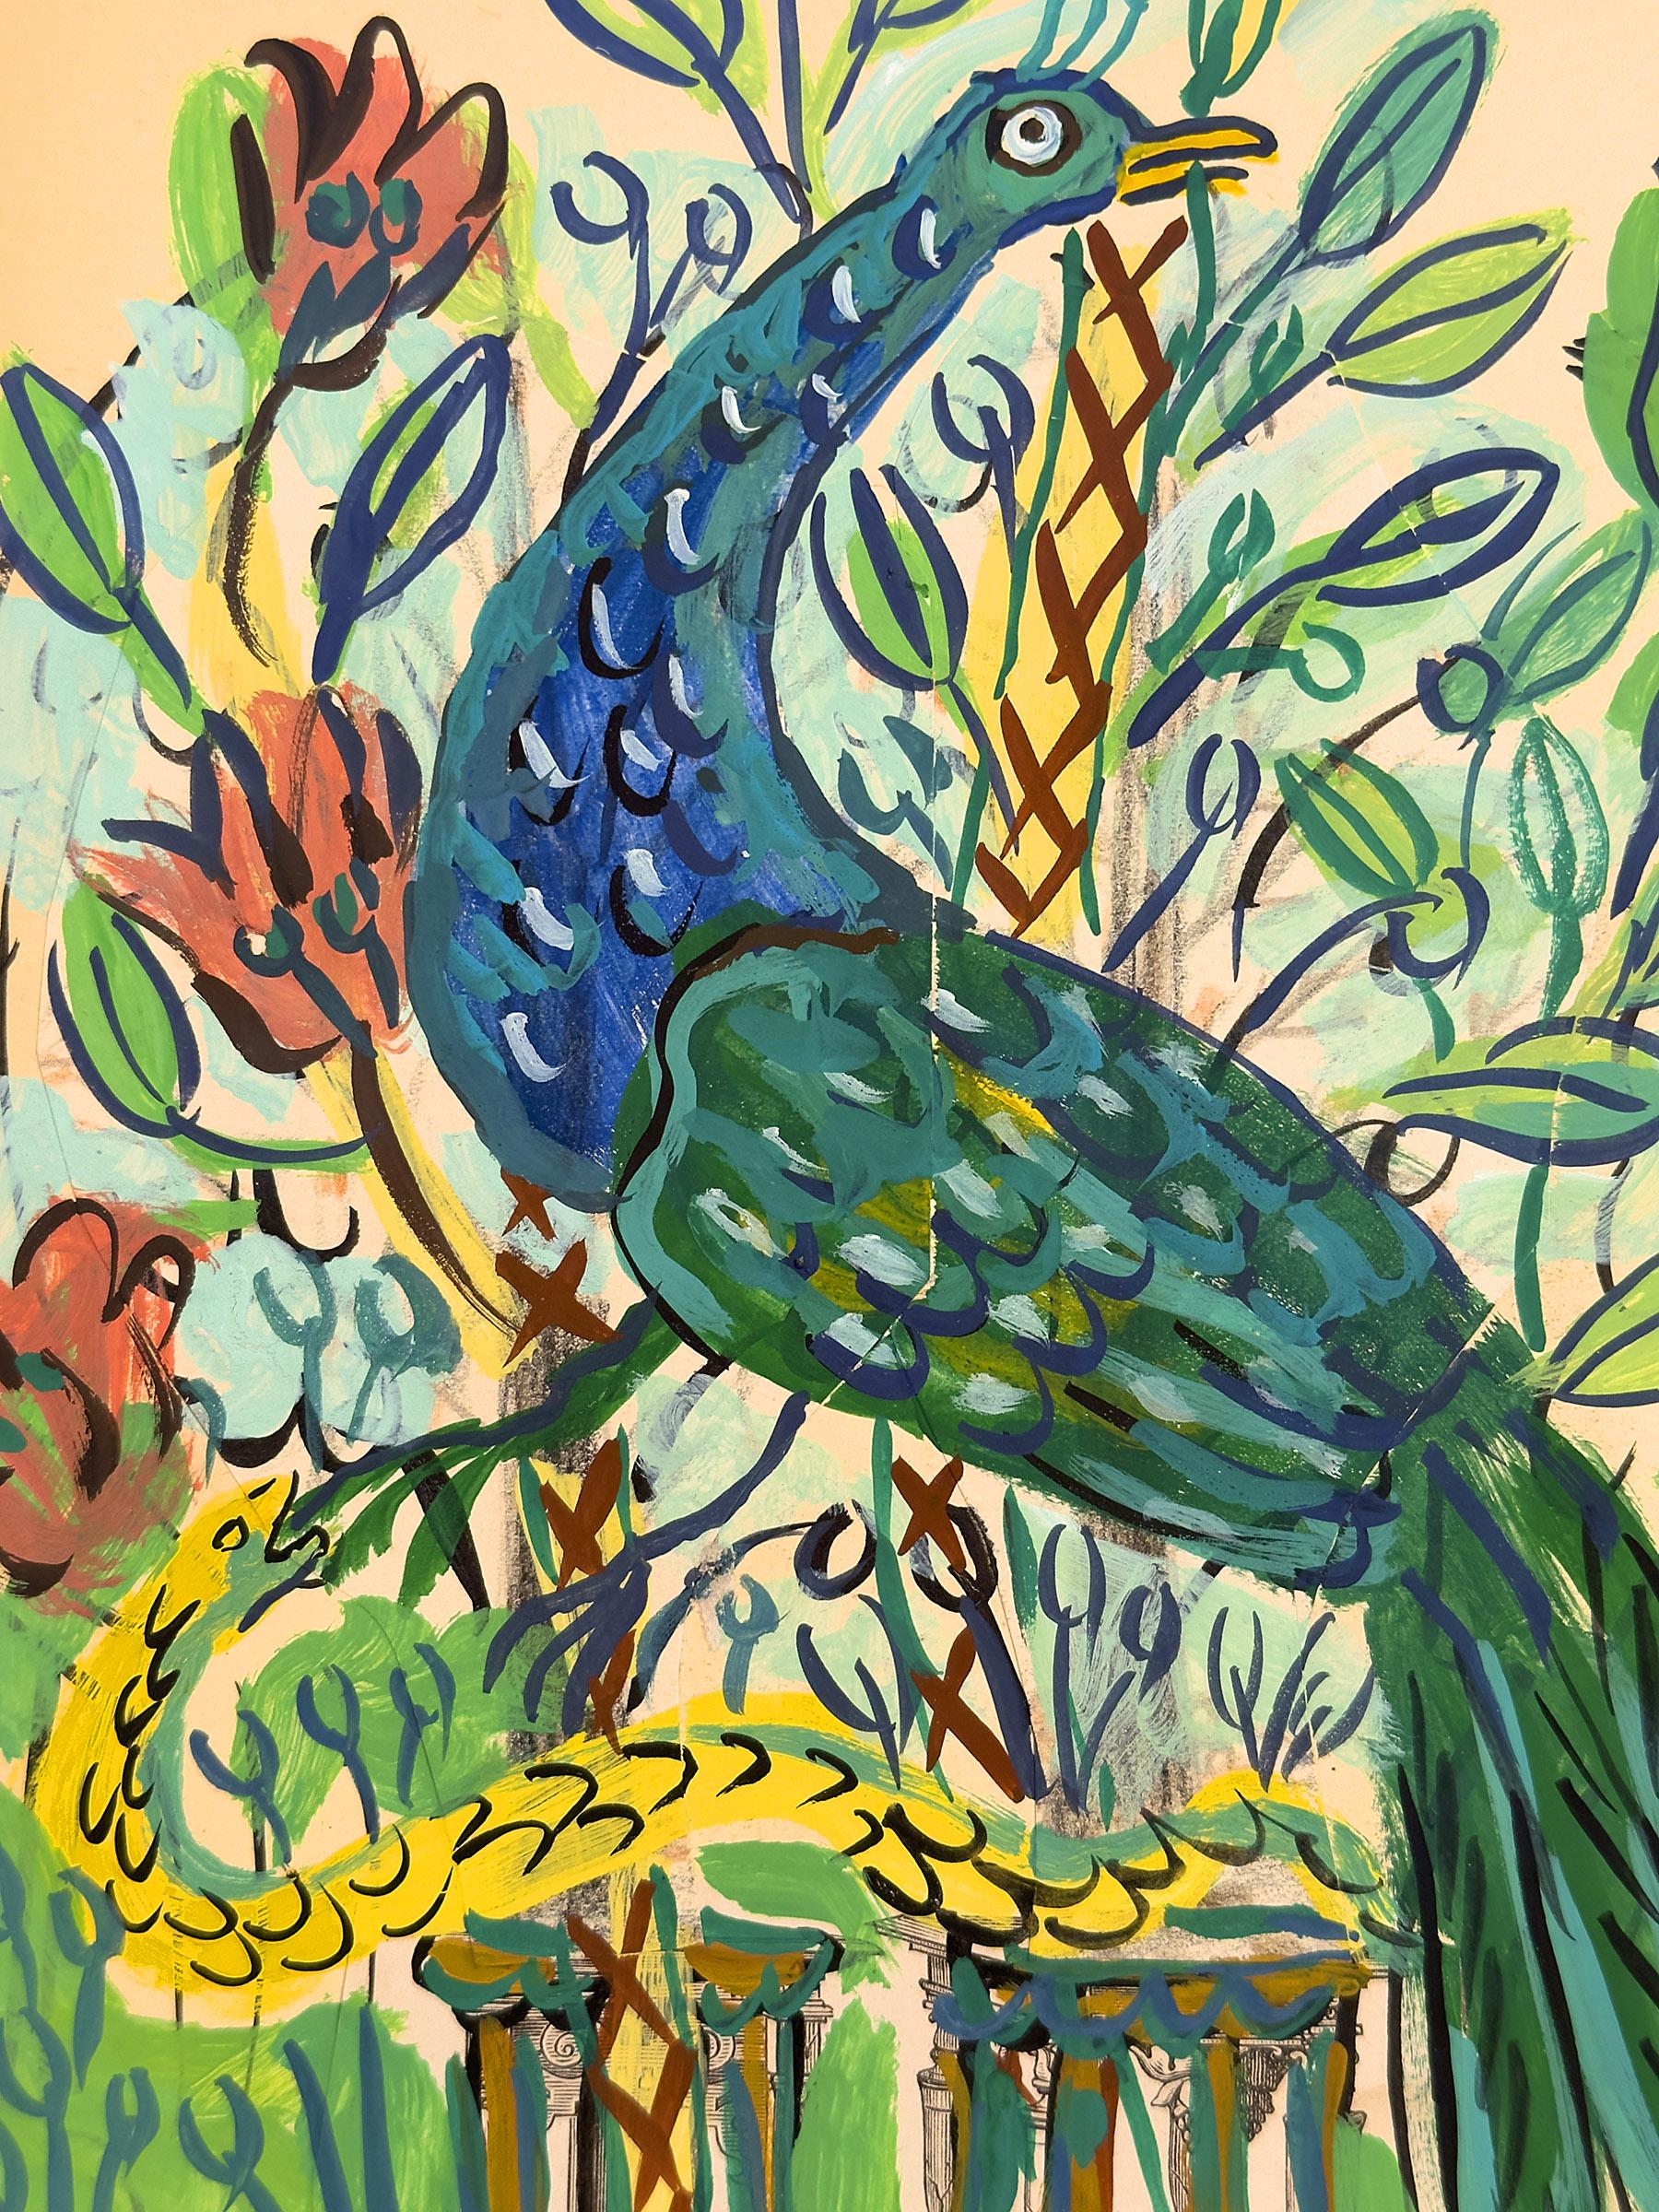 Drawing in gouache, made on a sheet of paper with lithographs from the 19th century (on the back), found in antique shops in Brussels, Belgium.

Bela Silva's work, so organic and colorful, expresses itself a lot in all imaginable shades of green and